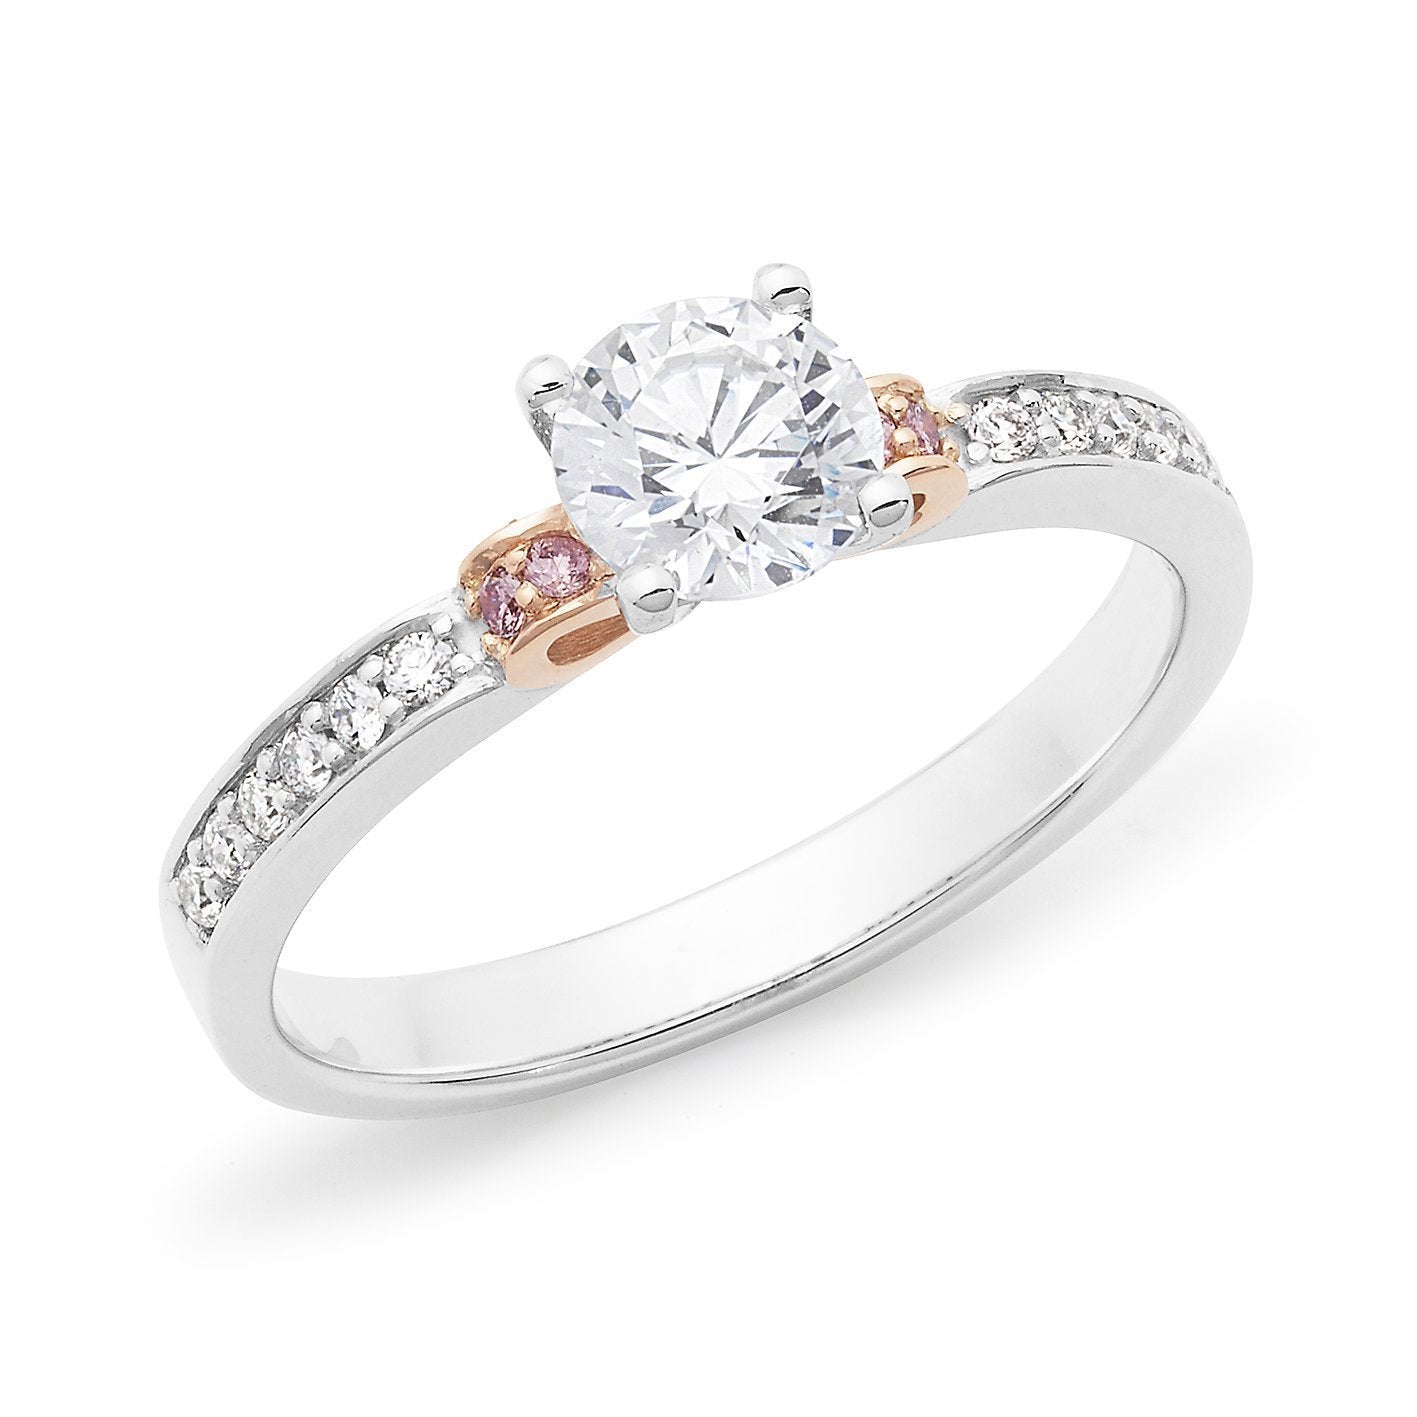 PINK CAVIAR 0.64ct White Round Brilliant & Pink Diamond Engagement Ring in 18ct White Gold